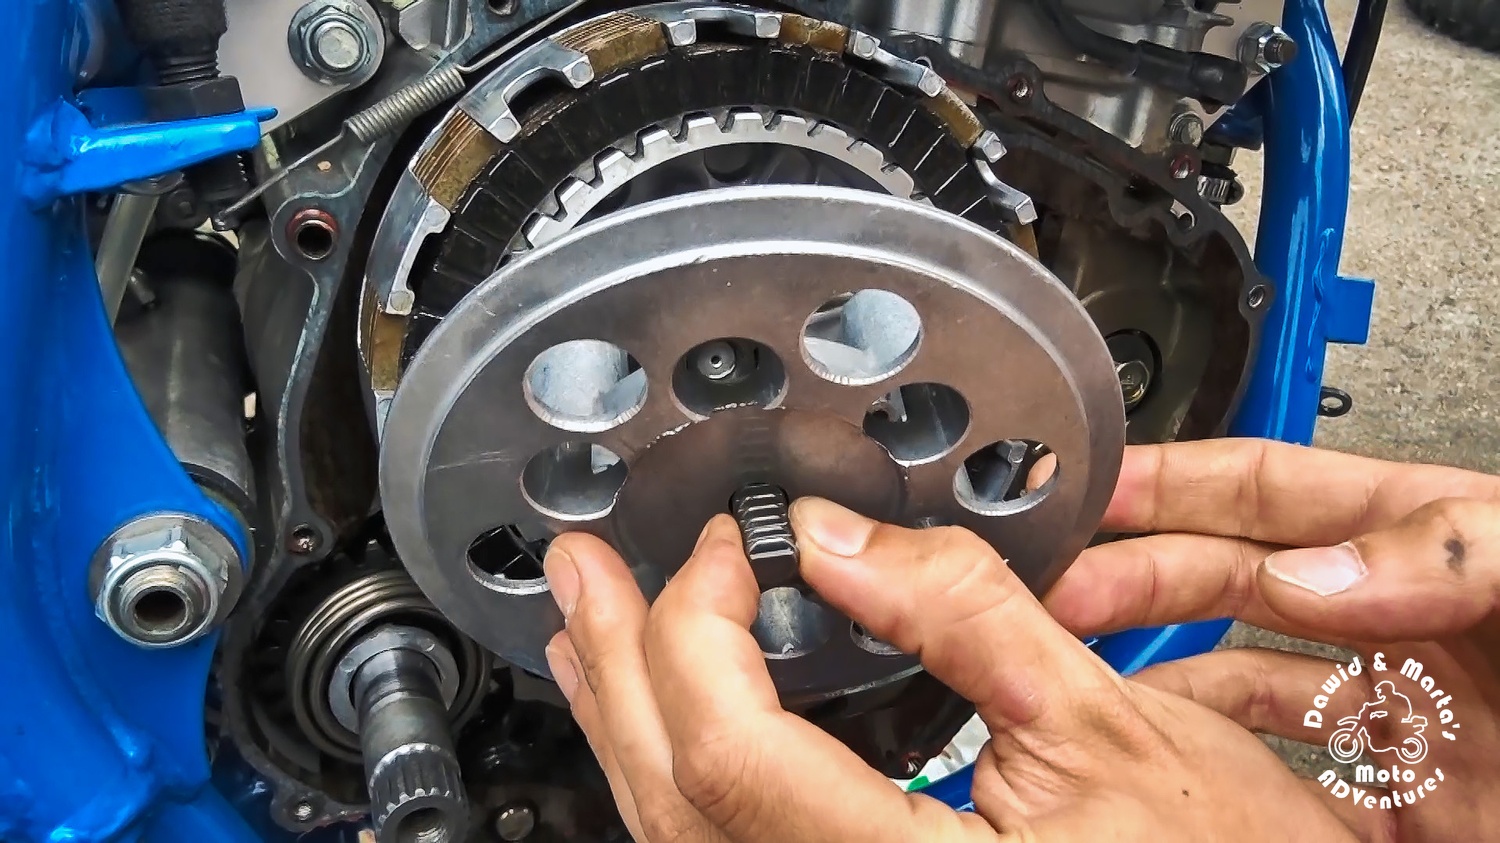 Removing the clutch basket pressure disc in DR350